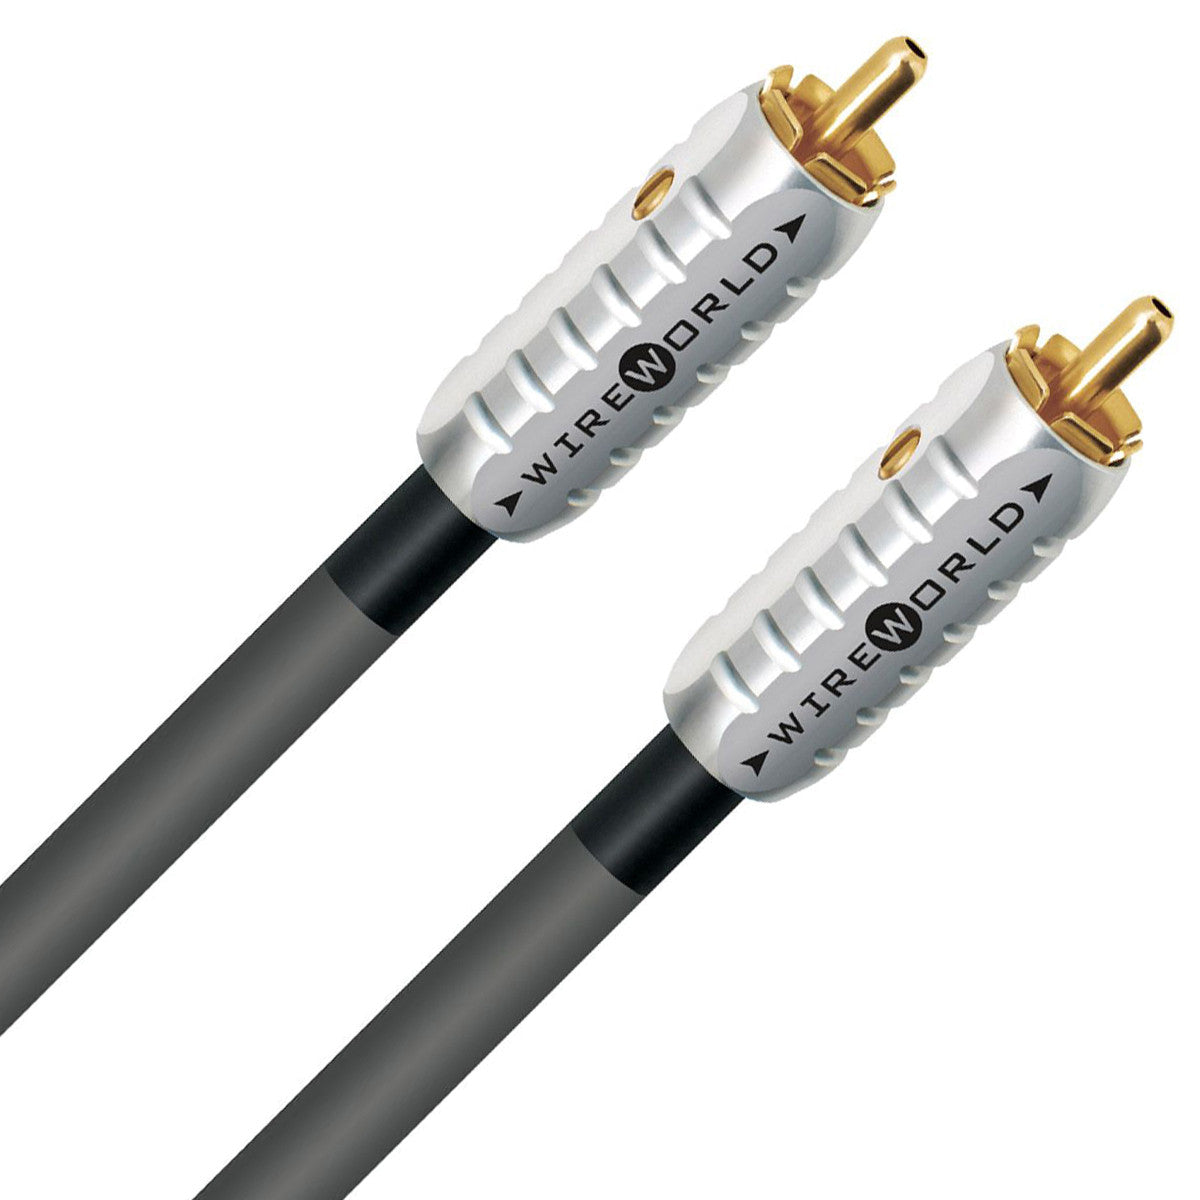 Wireworld Solstice 7 Audio Interconnect Subwoofer Cable